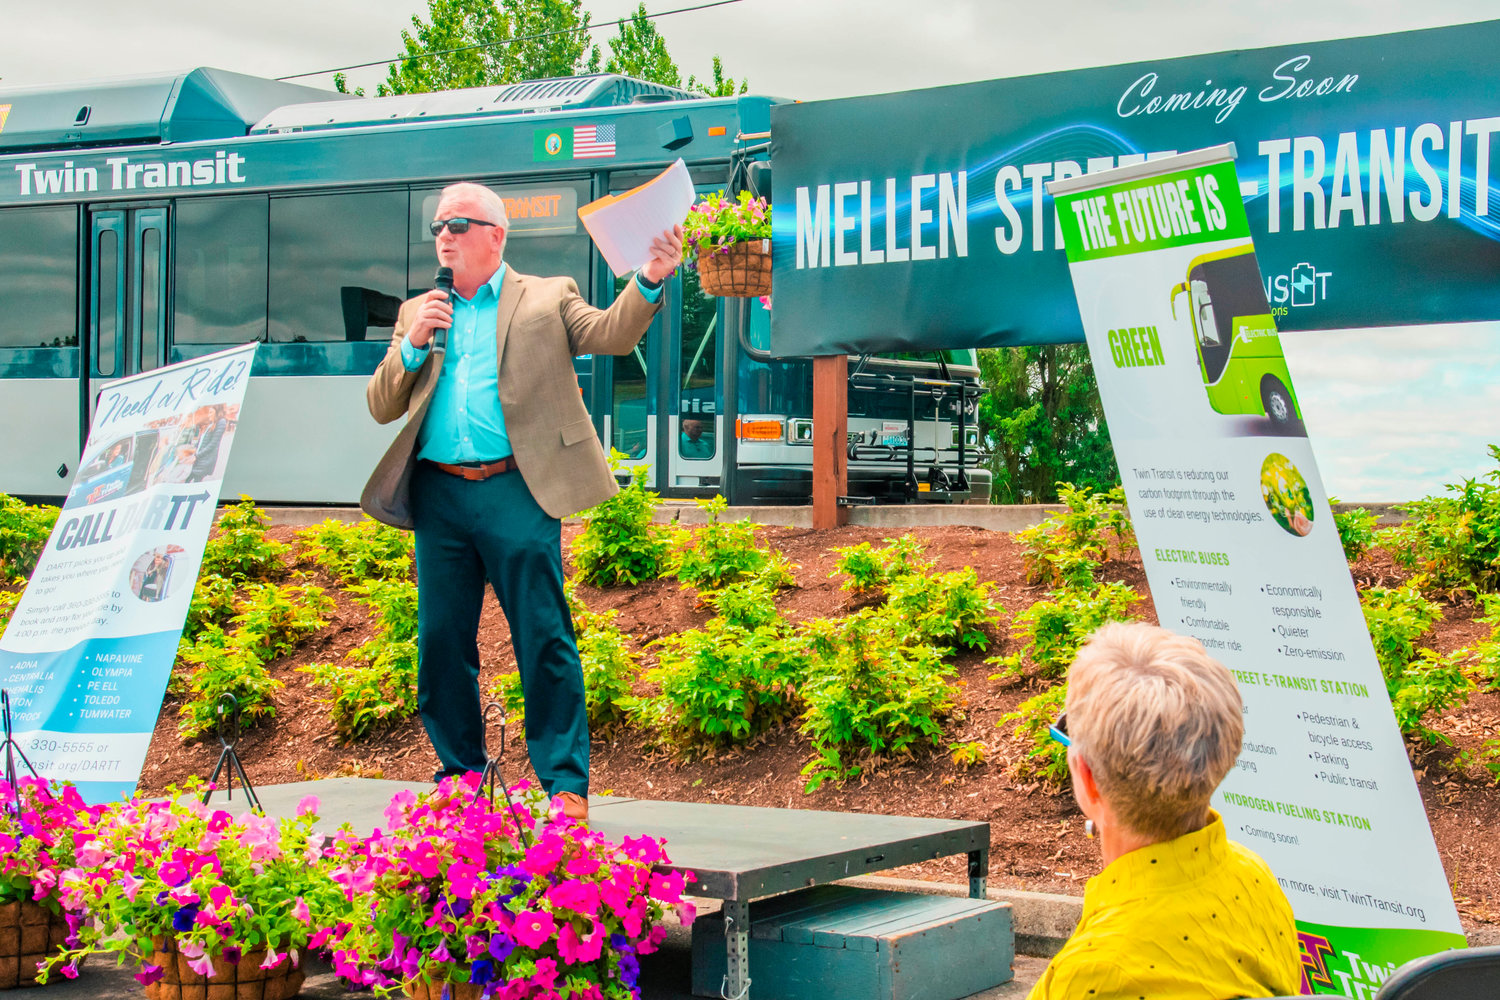 Twin Transit Executive Director Joe Clark speaks during the unveiling of the Mellen Street e-Transit Station in Centralia on Thursday.